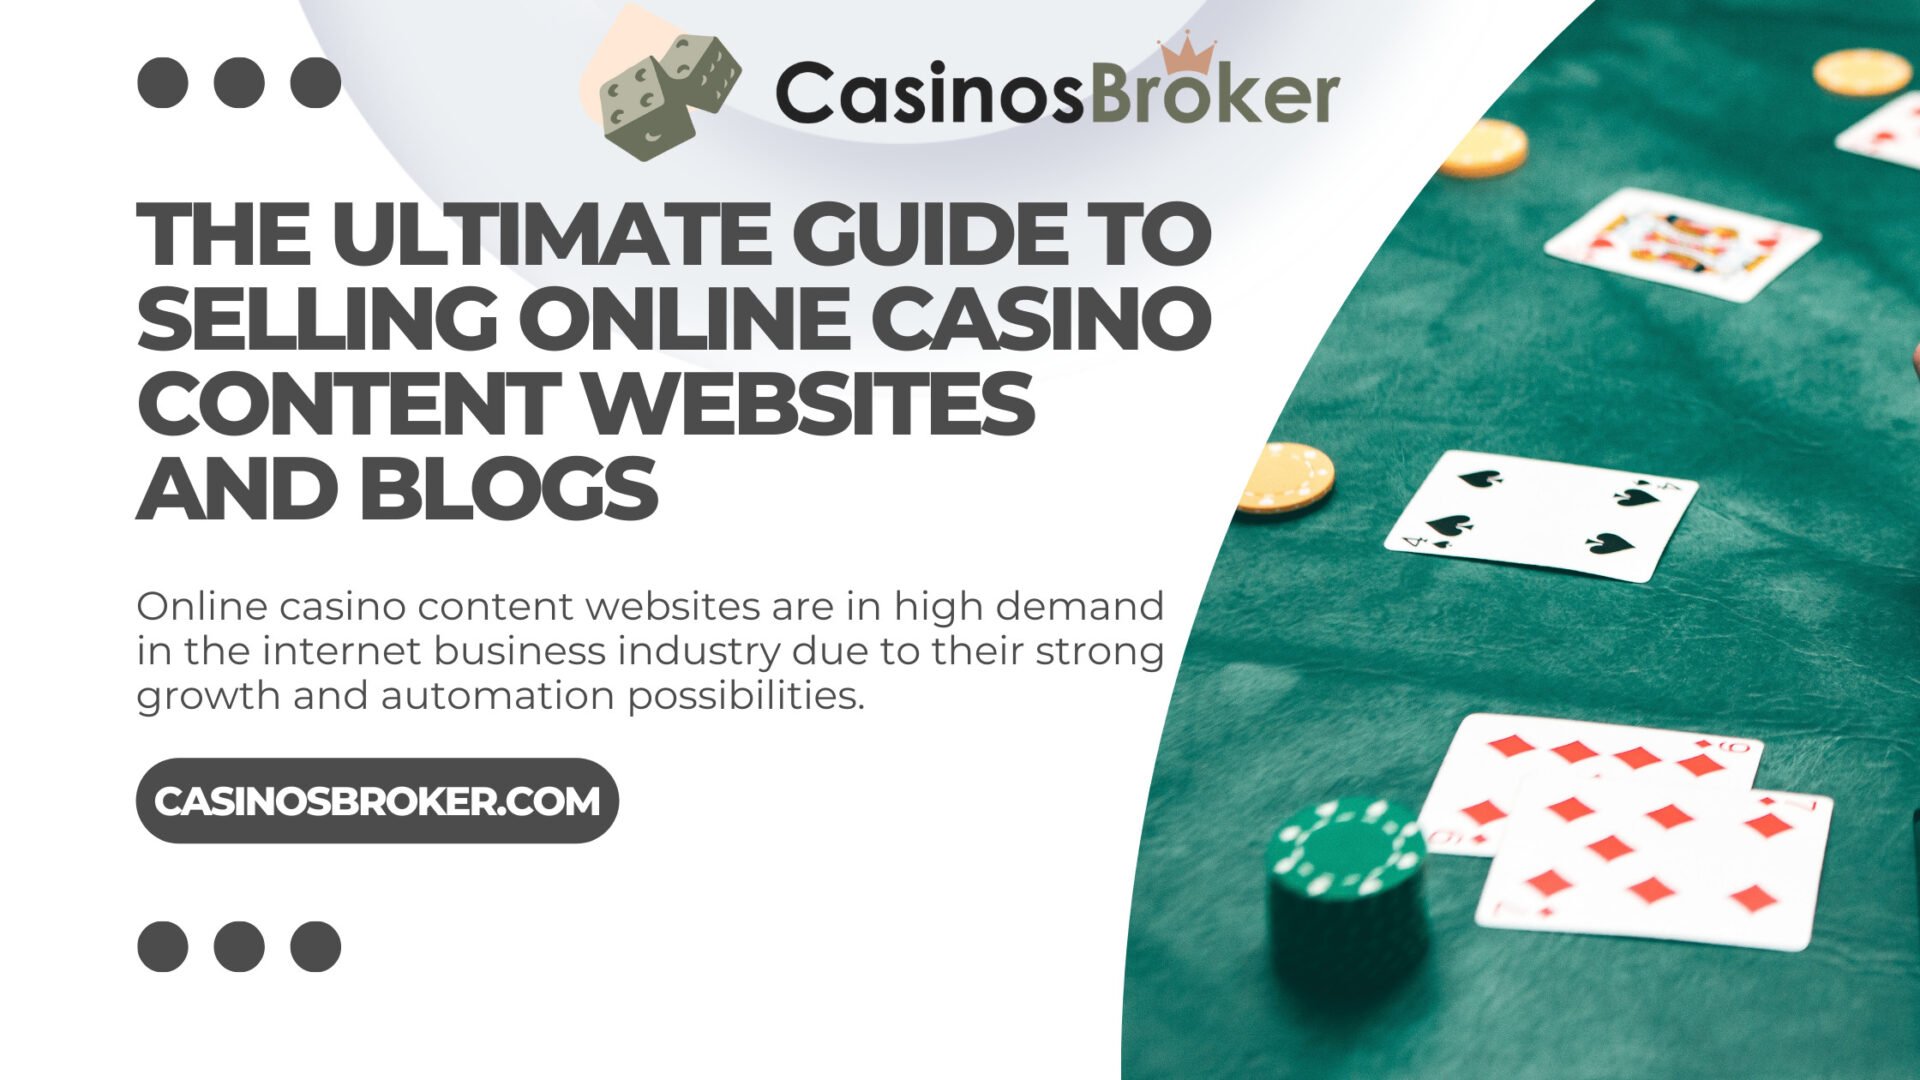 The Ultimate Guide to Selling Online Casino Content Websites and Blogs